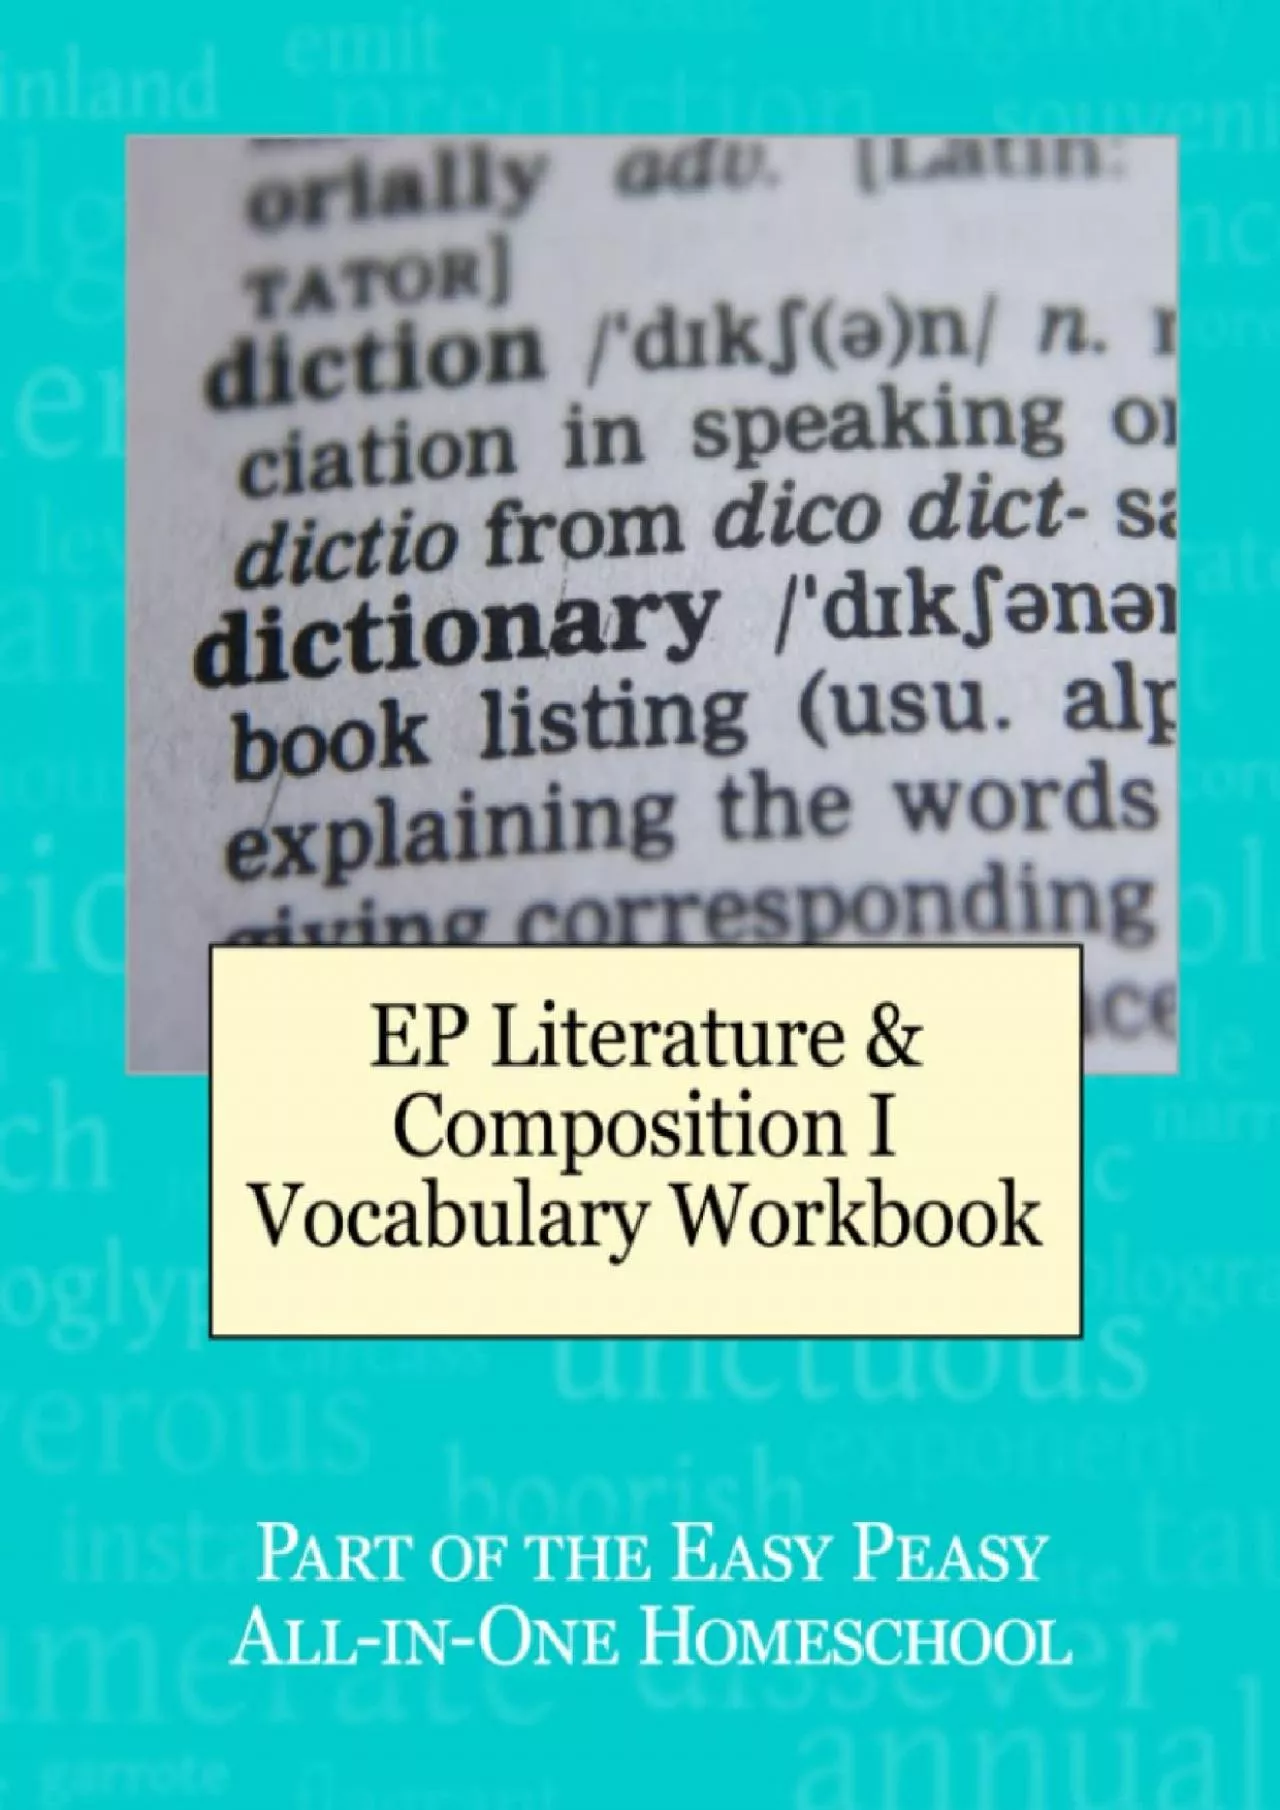 [EBOOK] EP Literature and Composition I Vocabulary Workbook: Part of the Easy Peasy All-in-One